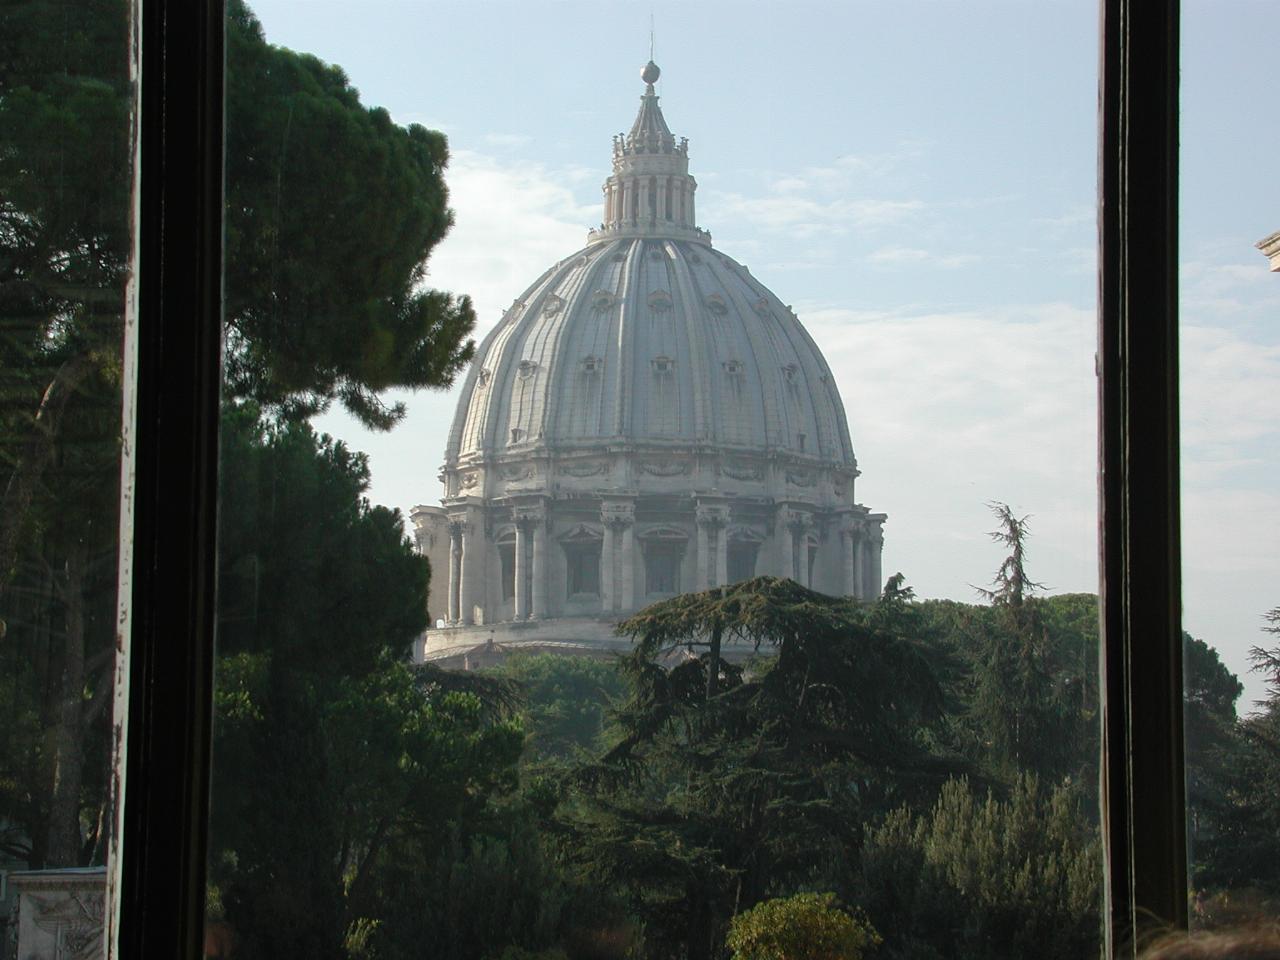 Michelangelo's Dome of St. Peters Basilica